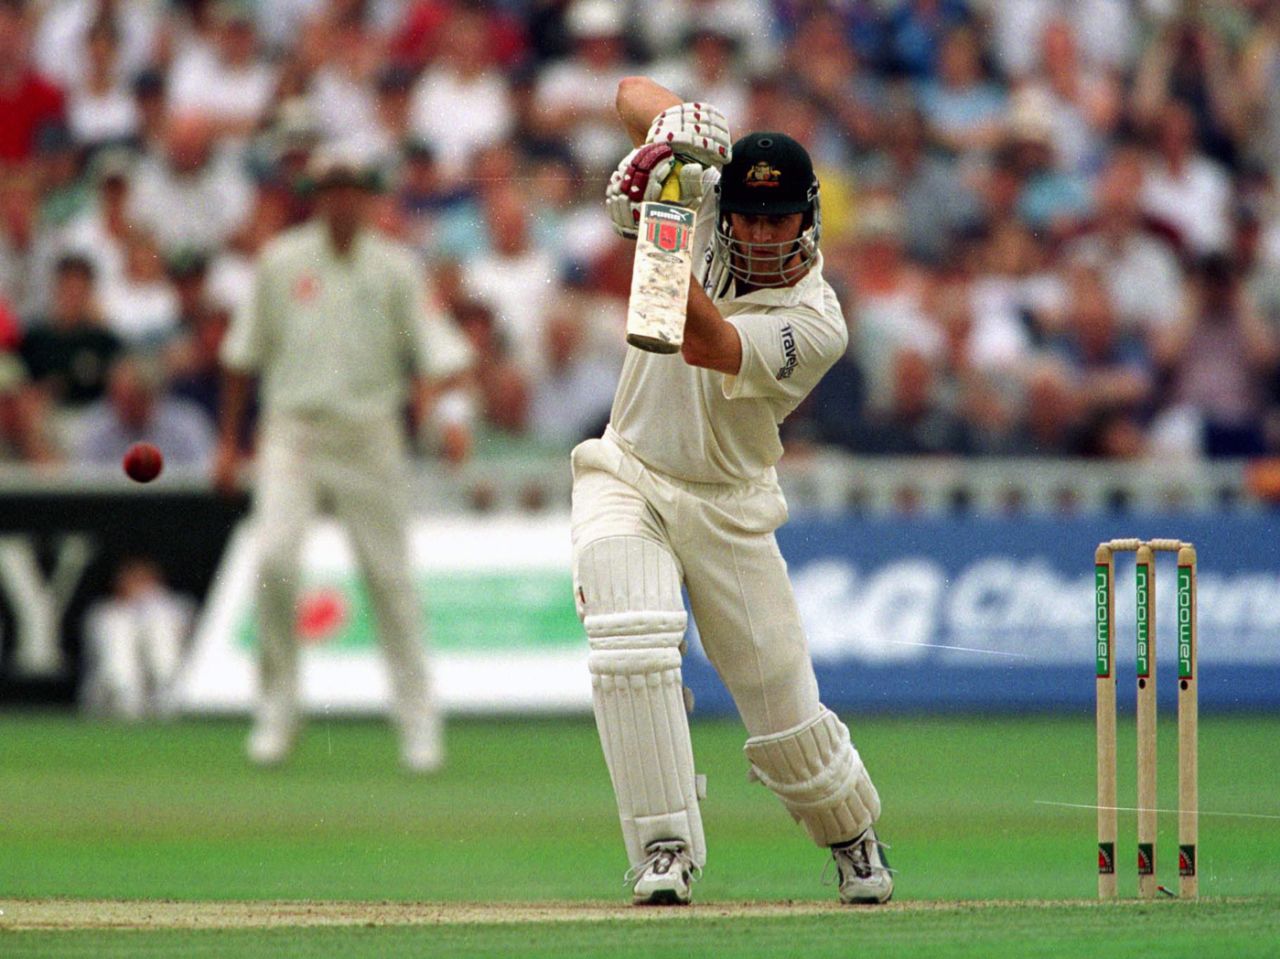 Adam Gilchrist drives on his way to 152, England v Australia, 1st Test, Edgbaston, 3rd day, July 7, 2001